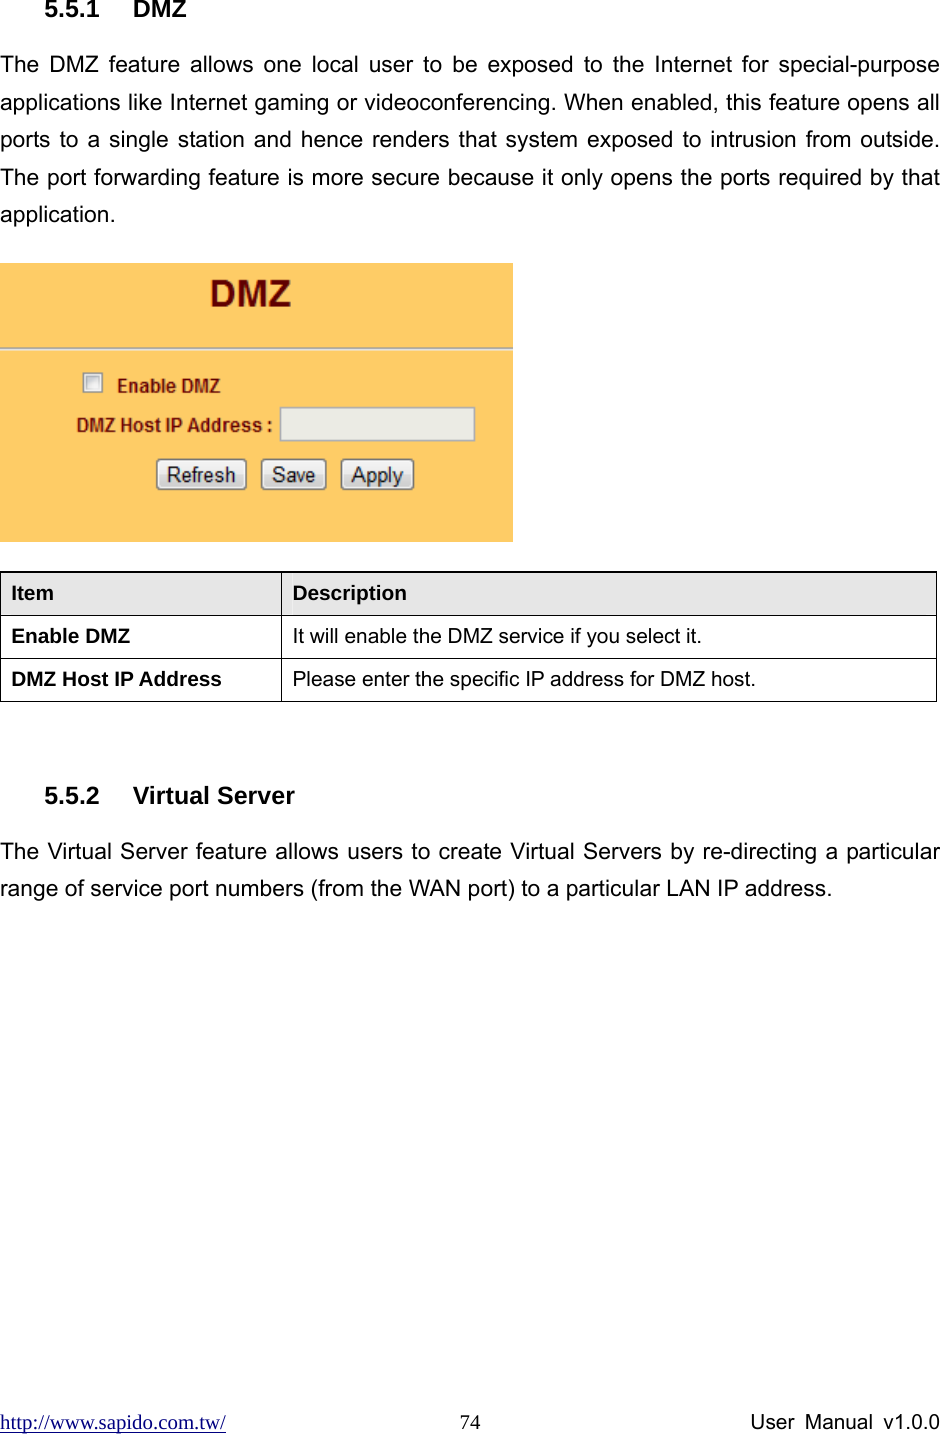 http://www.sapido.com.tw/                User Manual v1.0.0 74 5.5.1 DMZ The DMZ feature allows one local user to be exposed to the Internet for special-purpose applications like Internet gaming or videoconferencing. When enabled, this feature opens all ports to a single station and hence renders that system exposed to intrusion from outside. The port forwarding feature is more secure because it only opens the ports required by that application.   Item  Description Enable DMZ  It will enable the DMZ service if you select it. DMZ Host IP Address  Please enter the specific IP address for DMZ host.  5.5.2 Virtual Server  The Virtual Server feature allows users to create Virtual Servers by re-directing a particular range of service port numbers (from the WAN port) to a particular LAN IP address.   